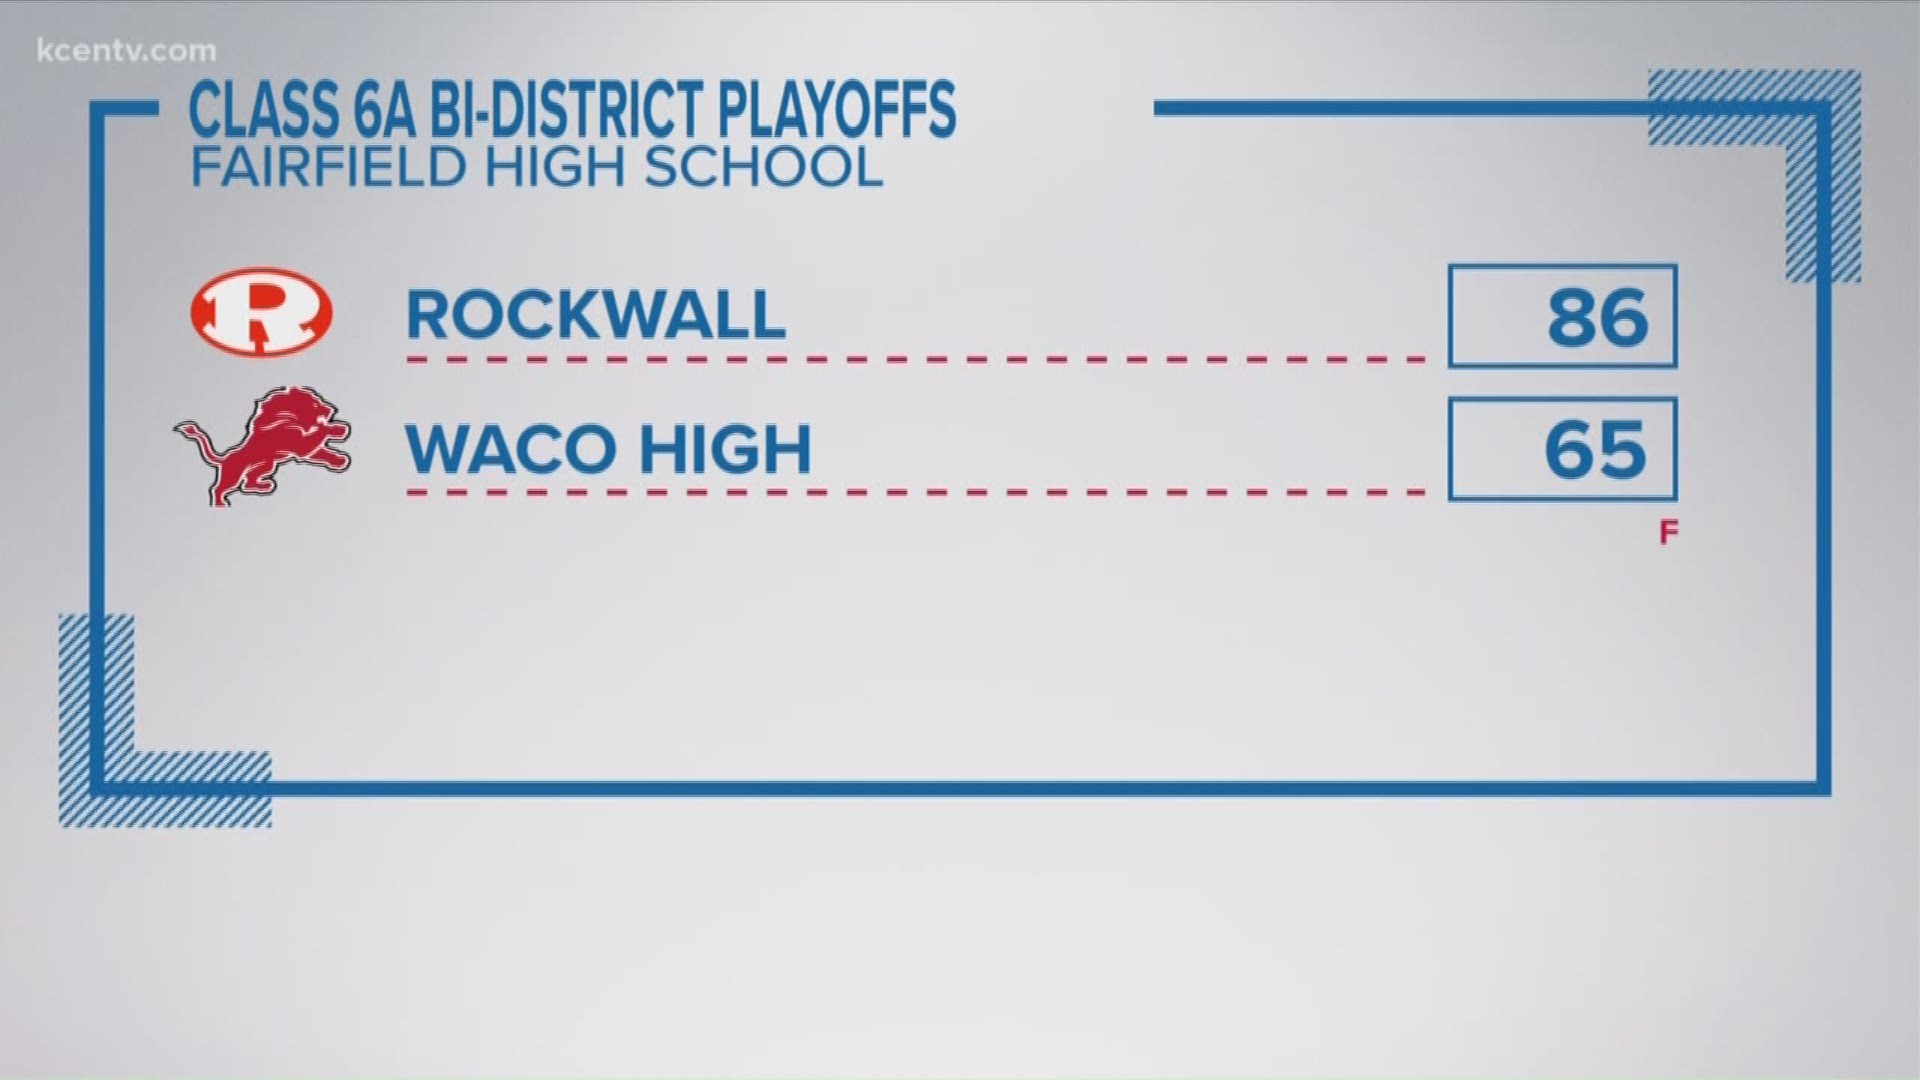 In this Class 6A Bi-District Playoff matchup, Rockwall bested Waco High 86-65.